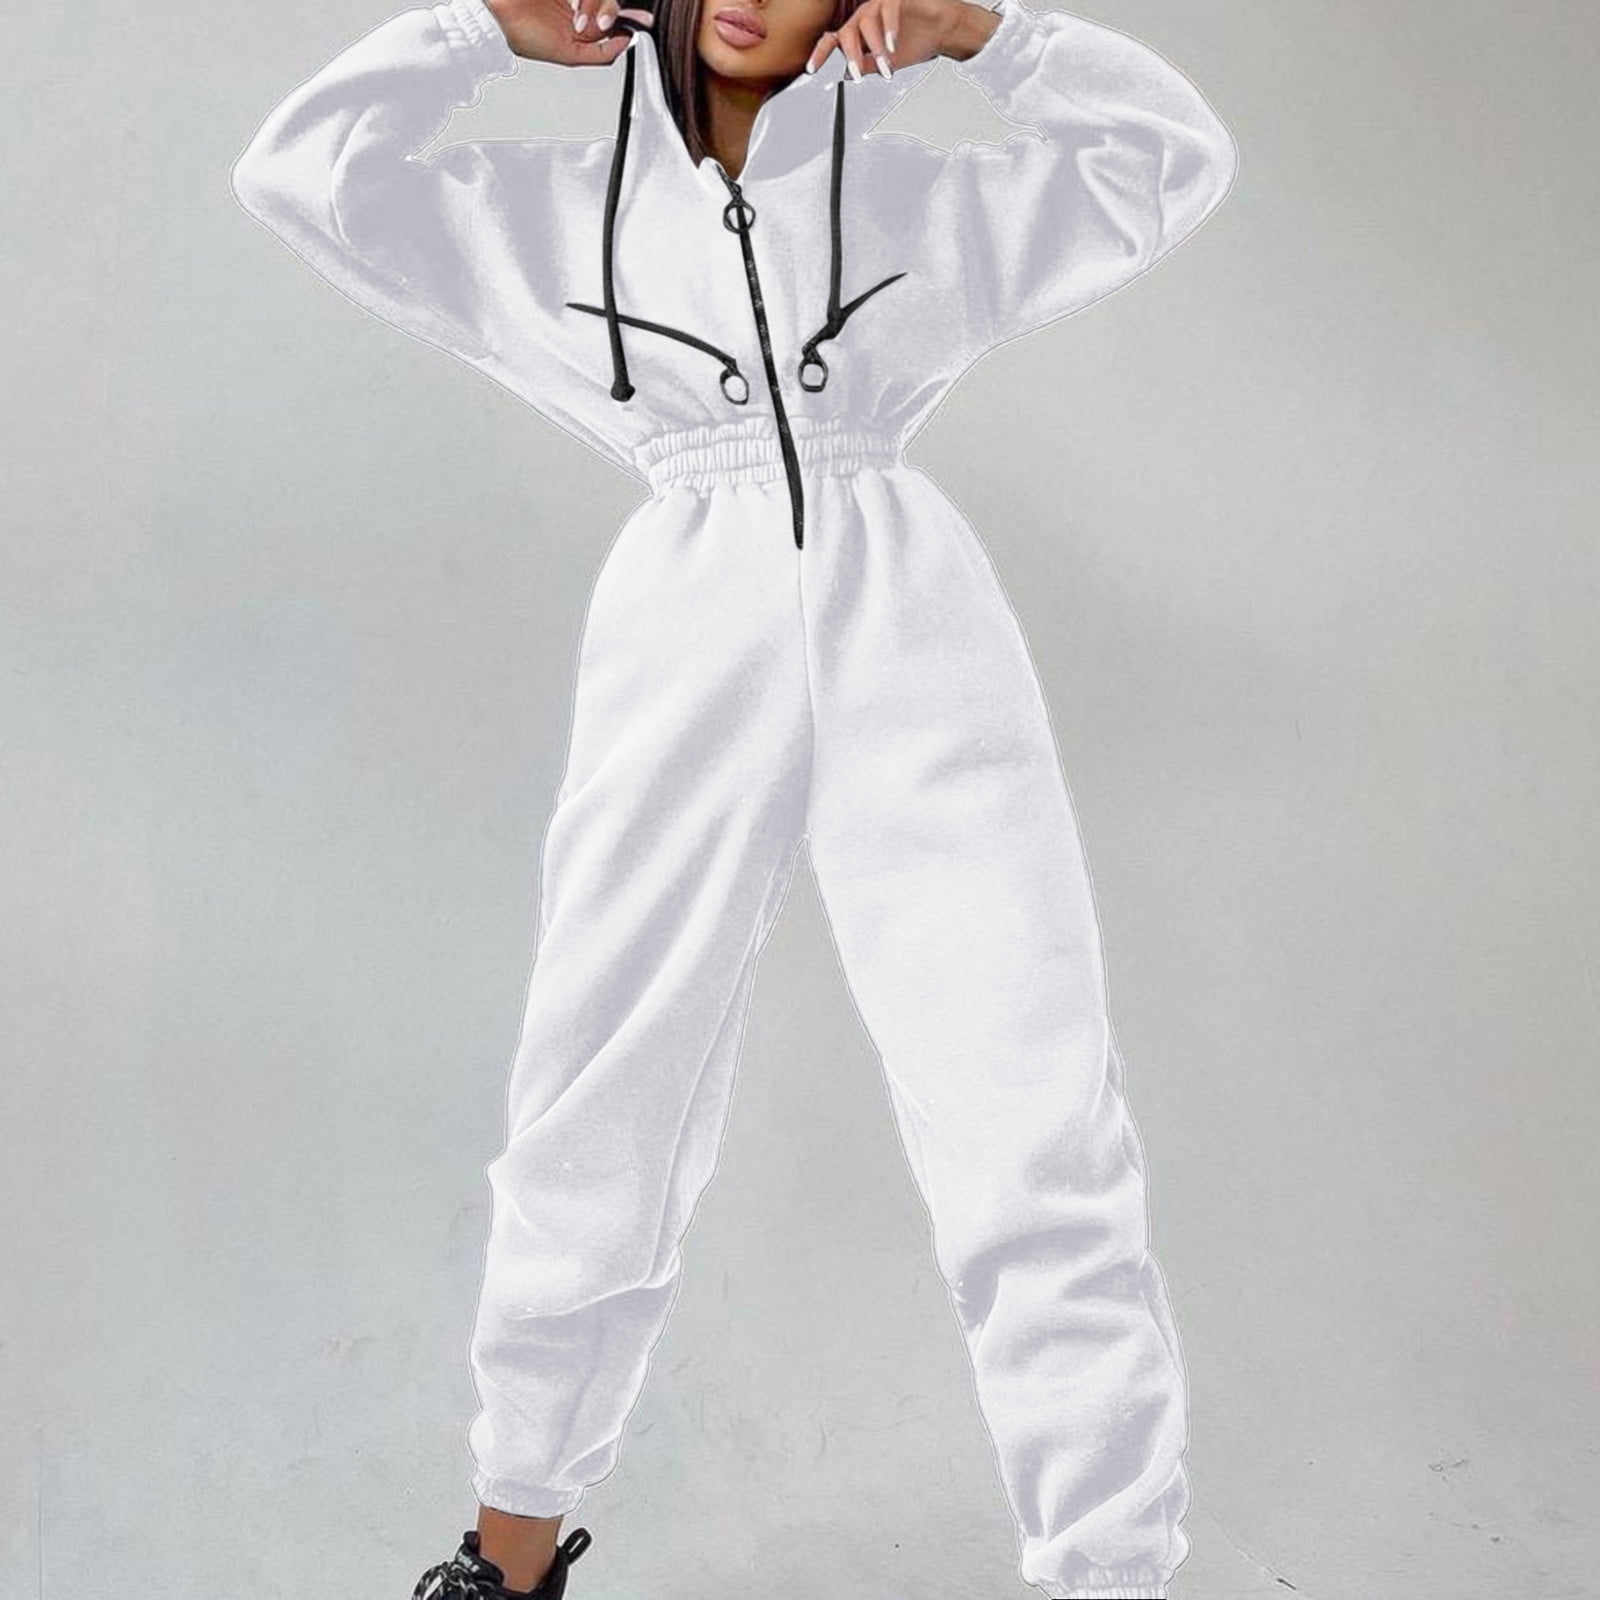  Women Hooded Jumpsuit Track Suit Casual One Piece Full Zipper  Hoodie Sweatshirts Set Winter Rompers Sweatsuit : Clothing, Shoes & Jewelry